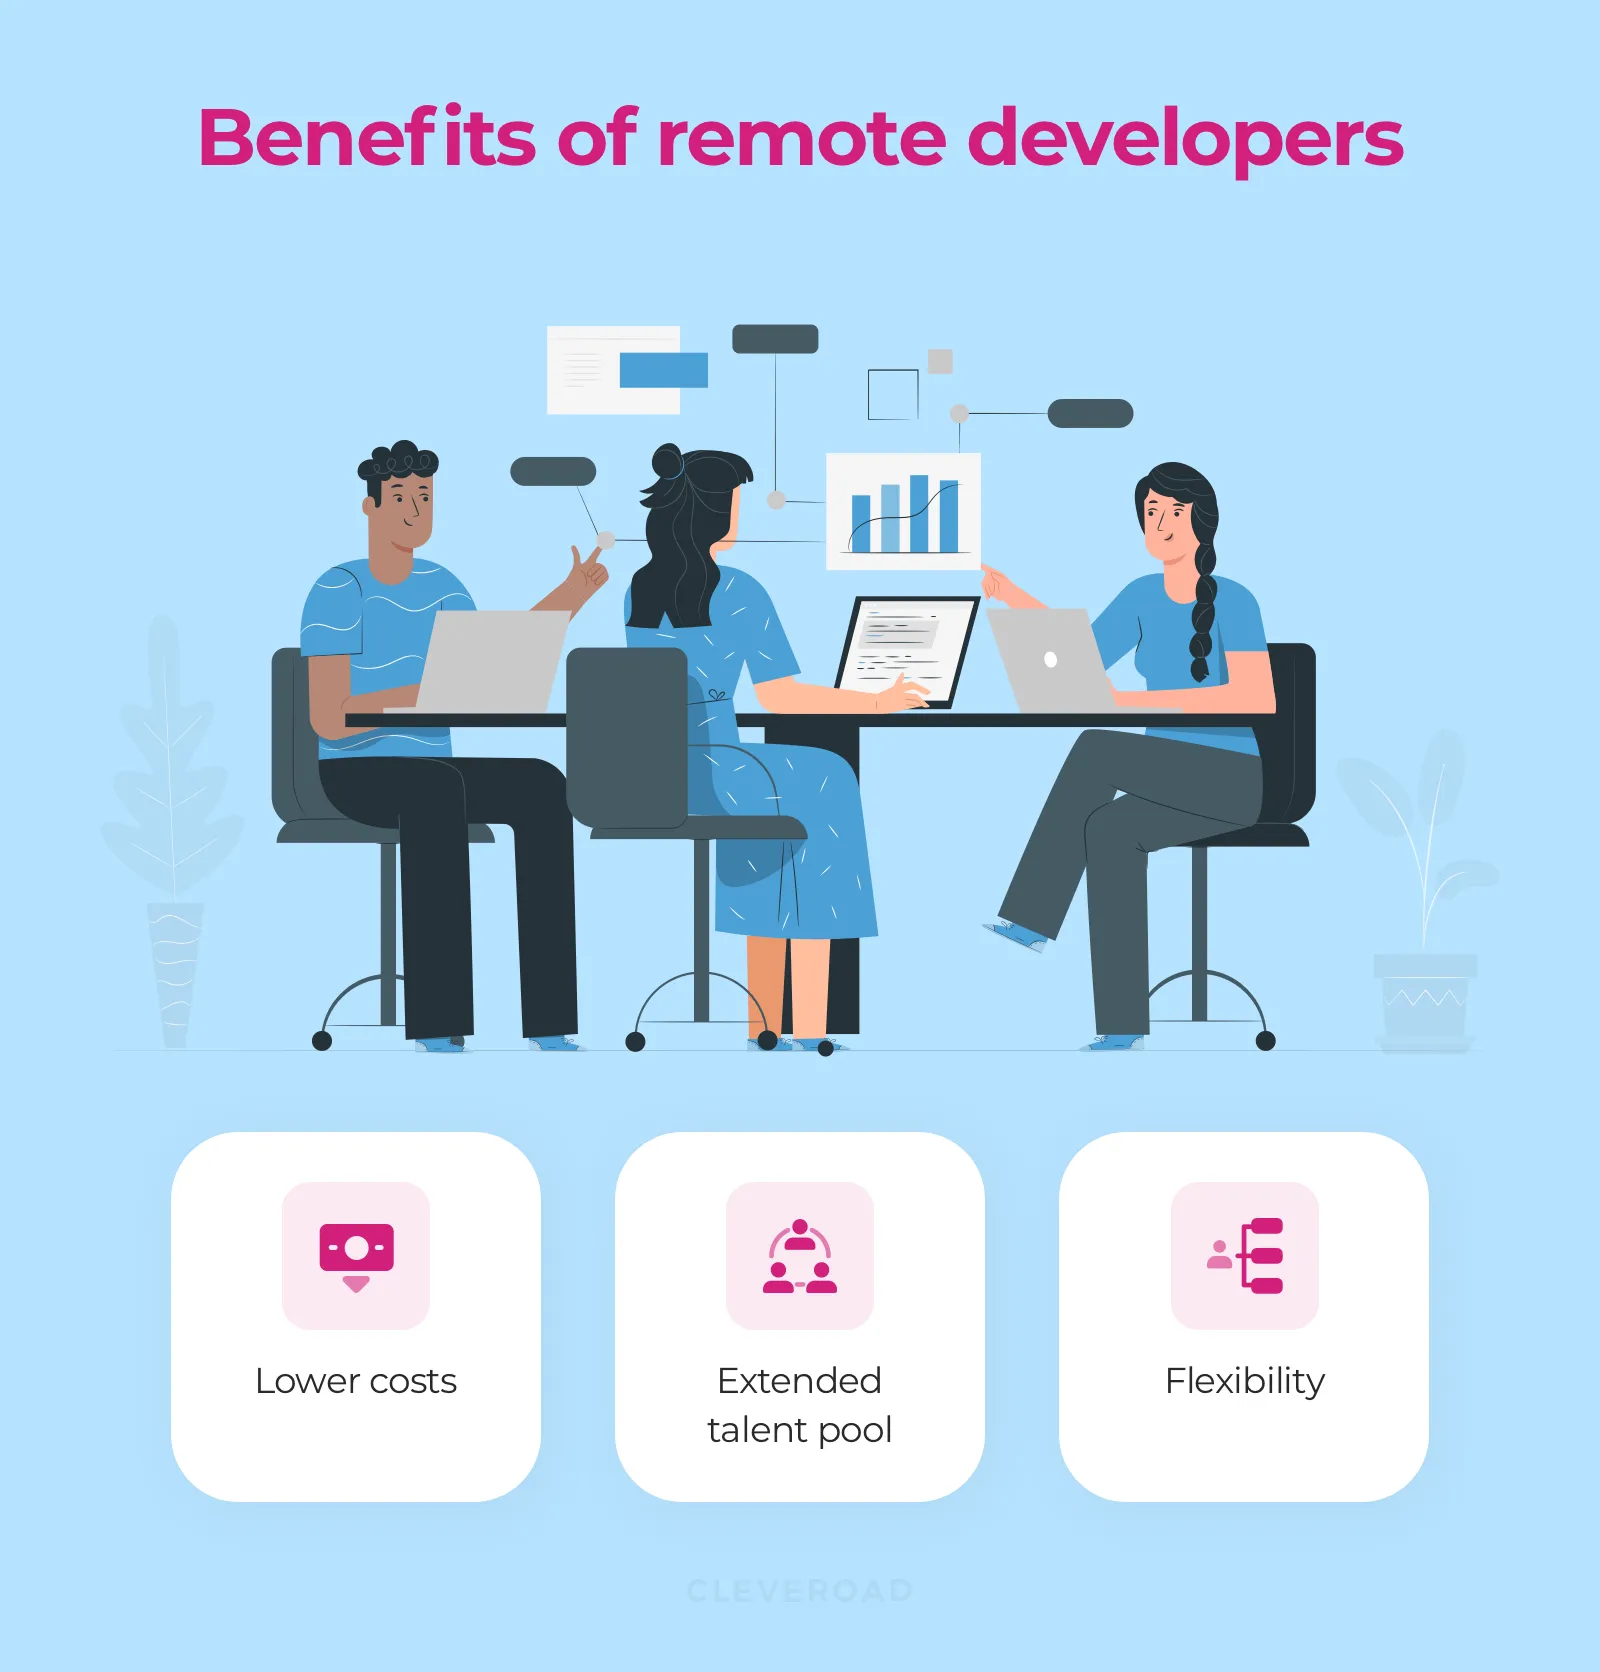 Benefits of hiring remote developers